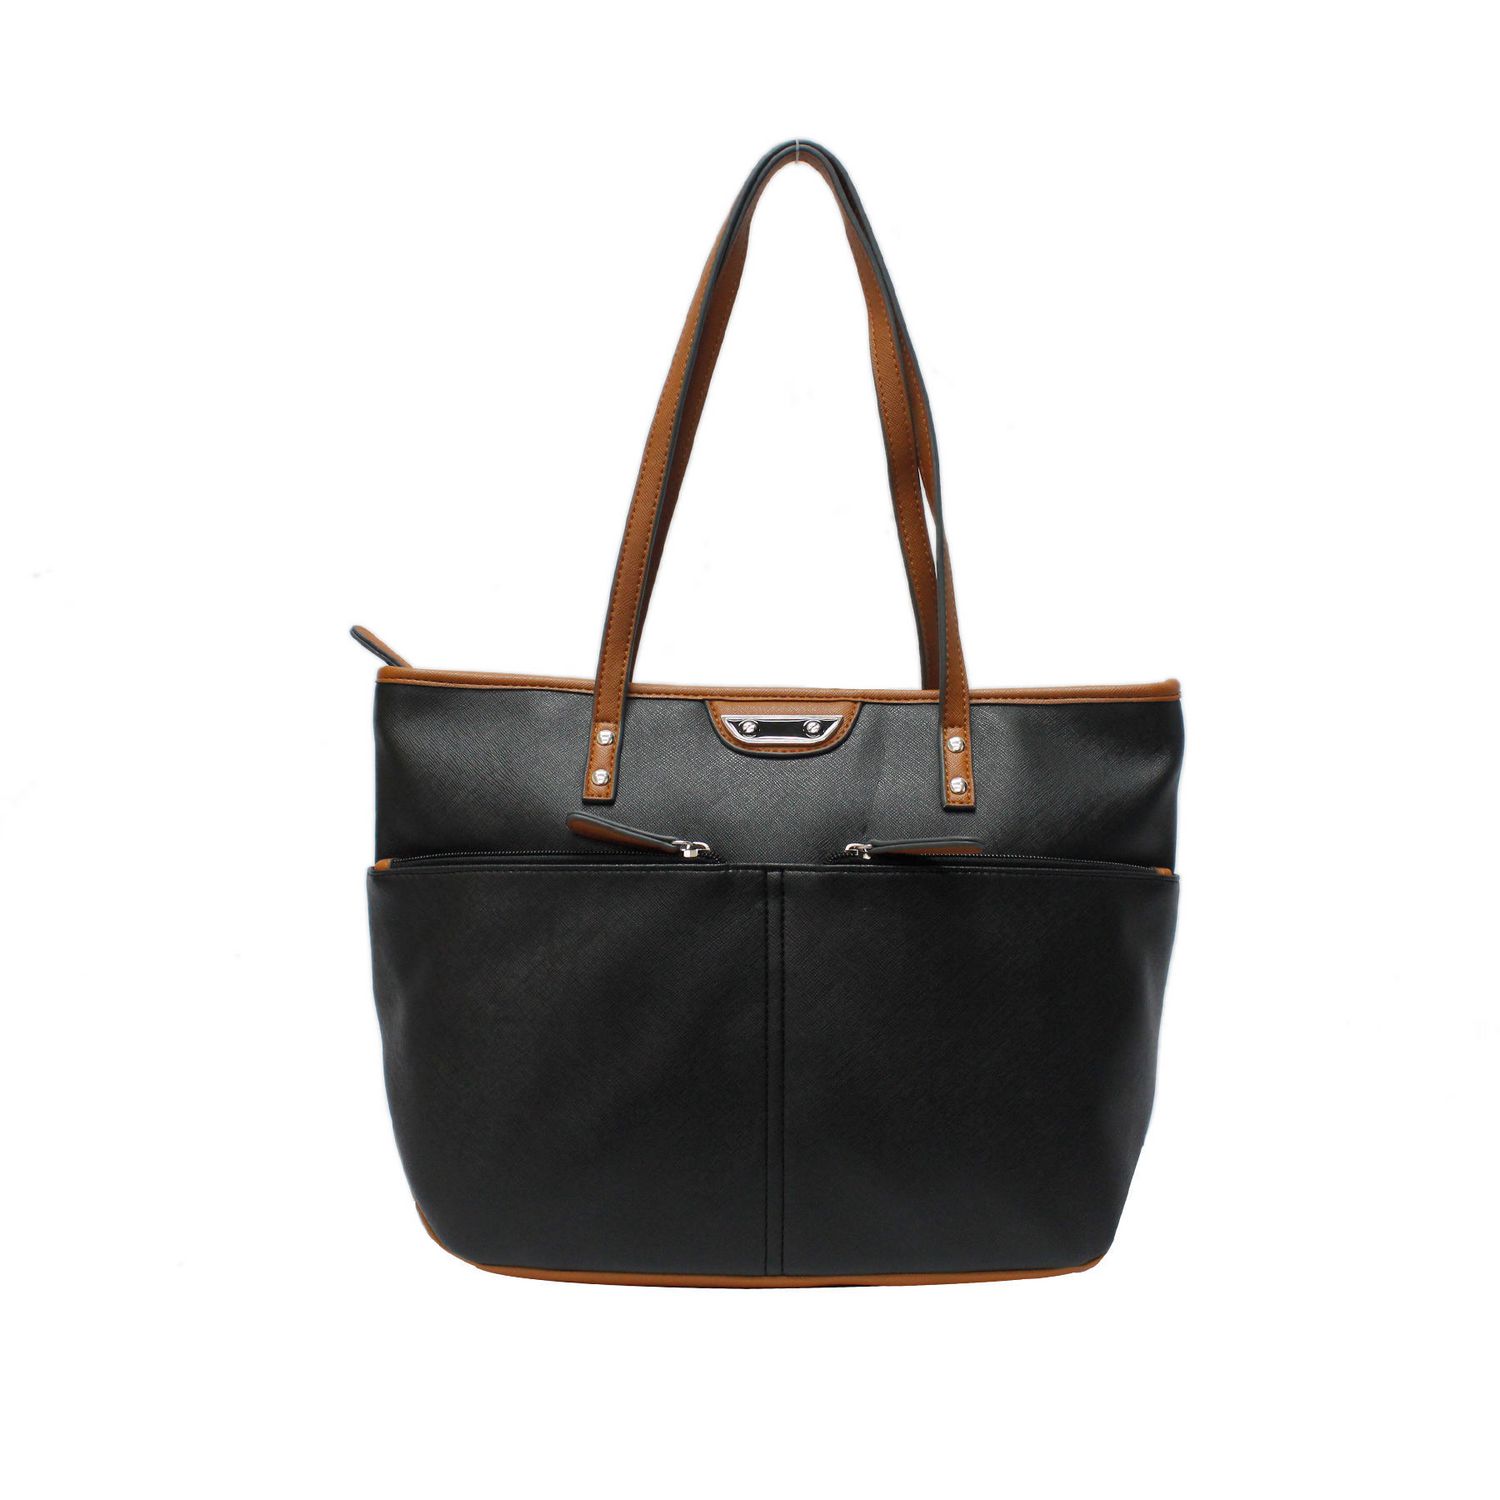 George Women's Lacey Item Tote | Walmart Canada